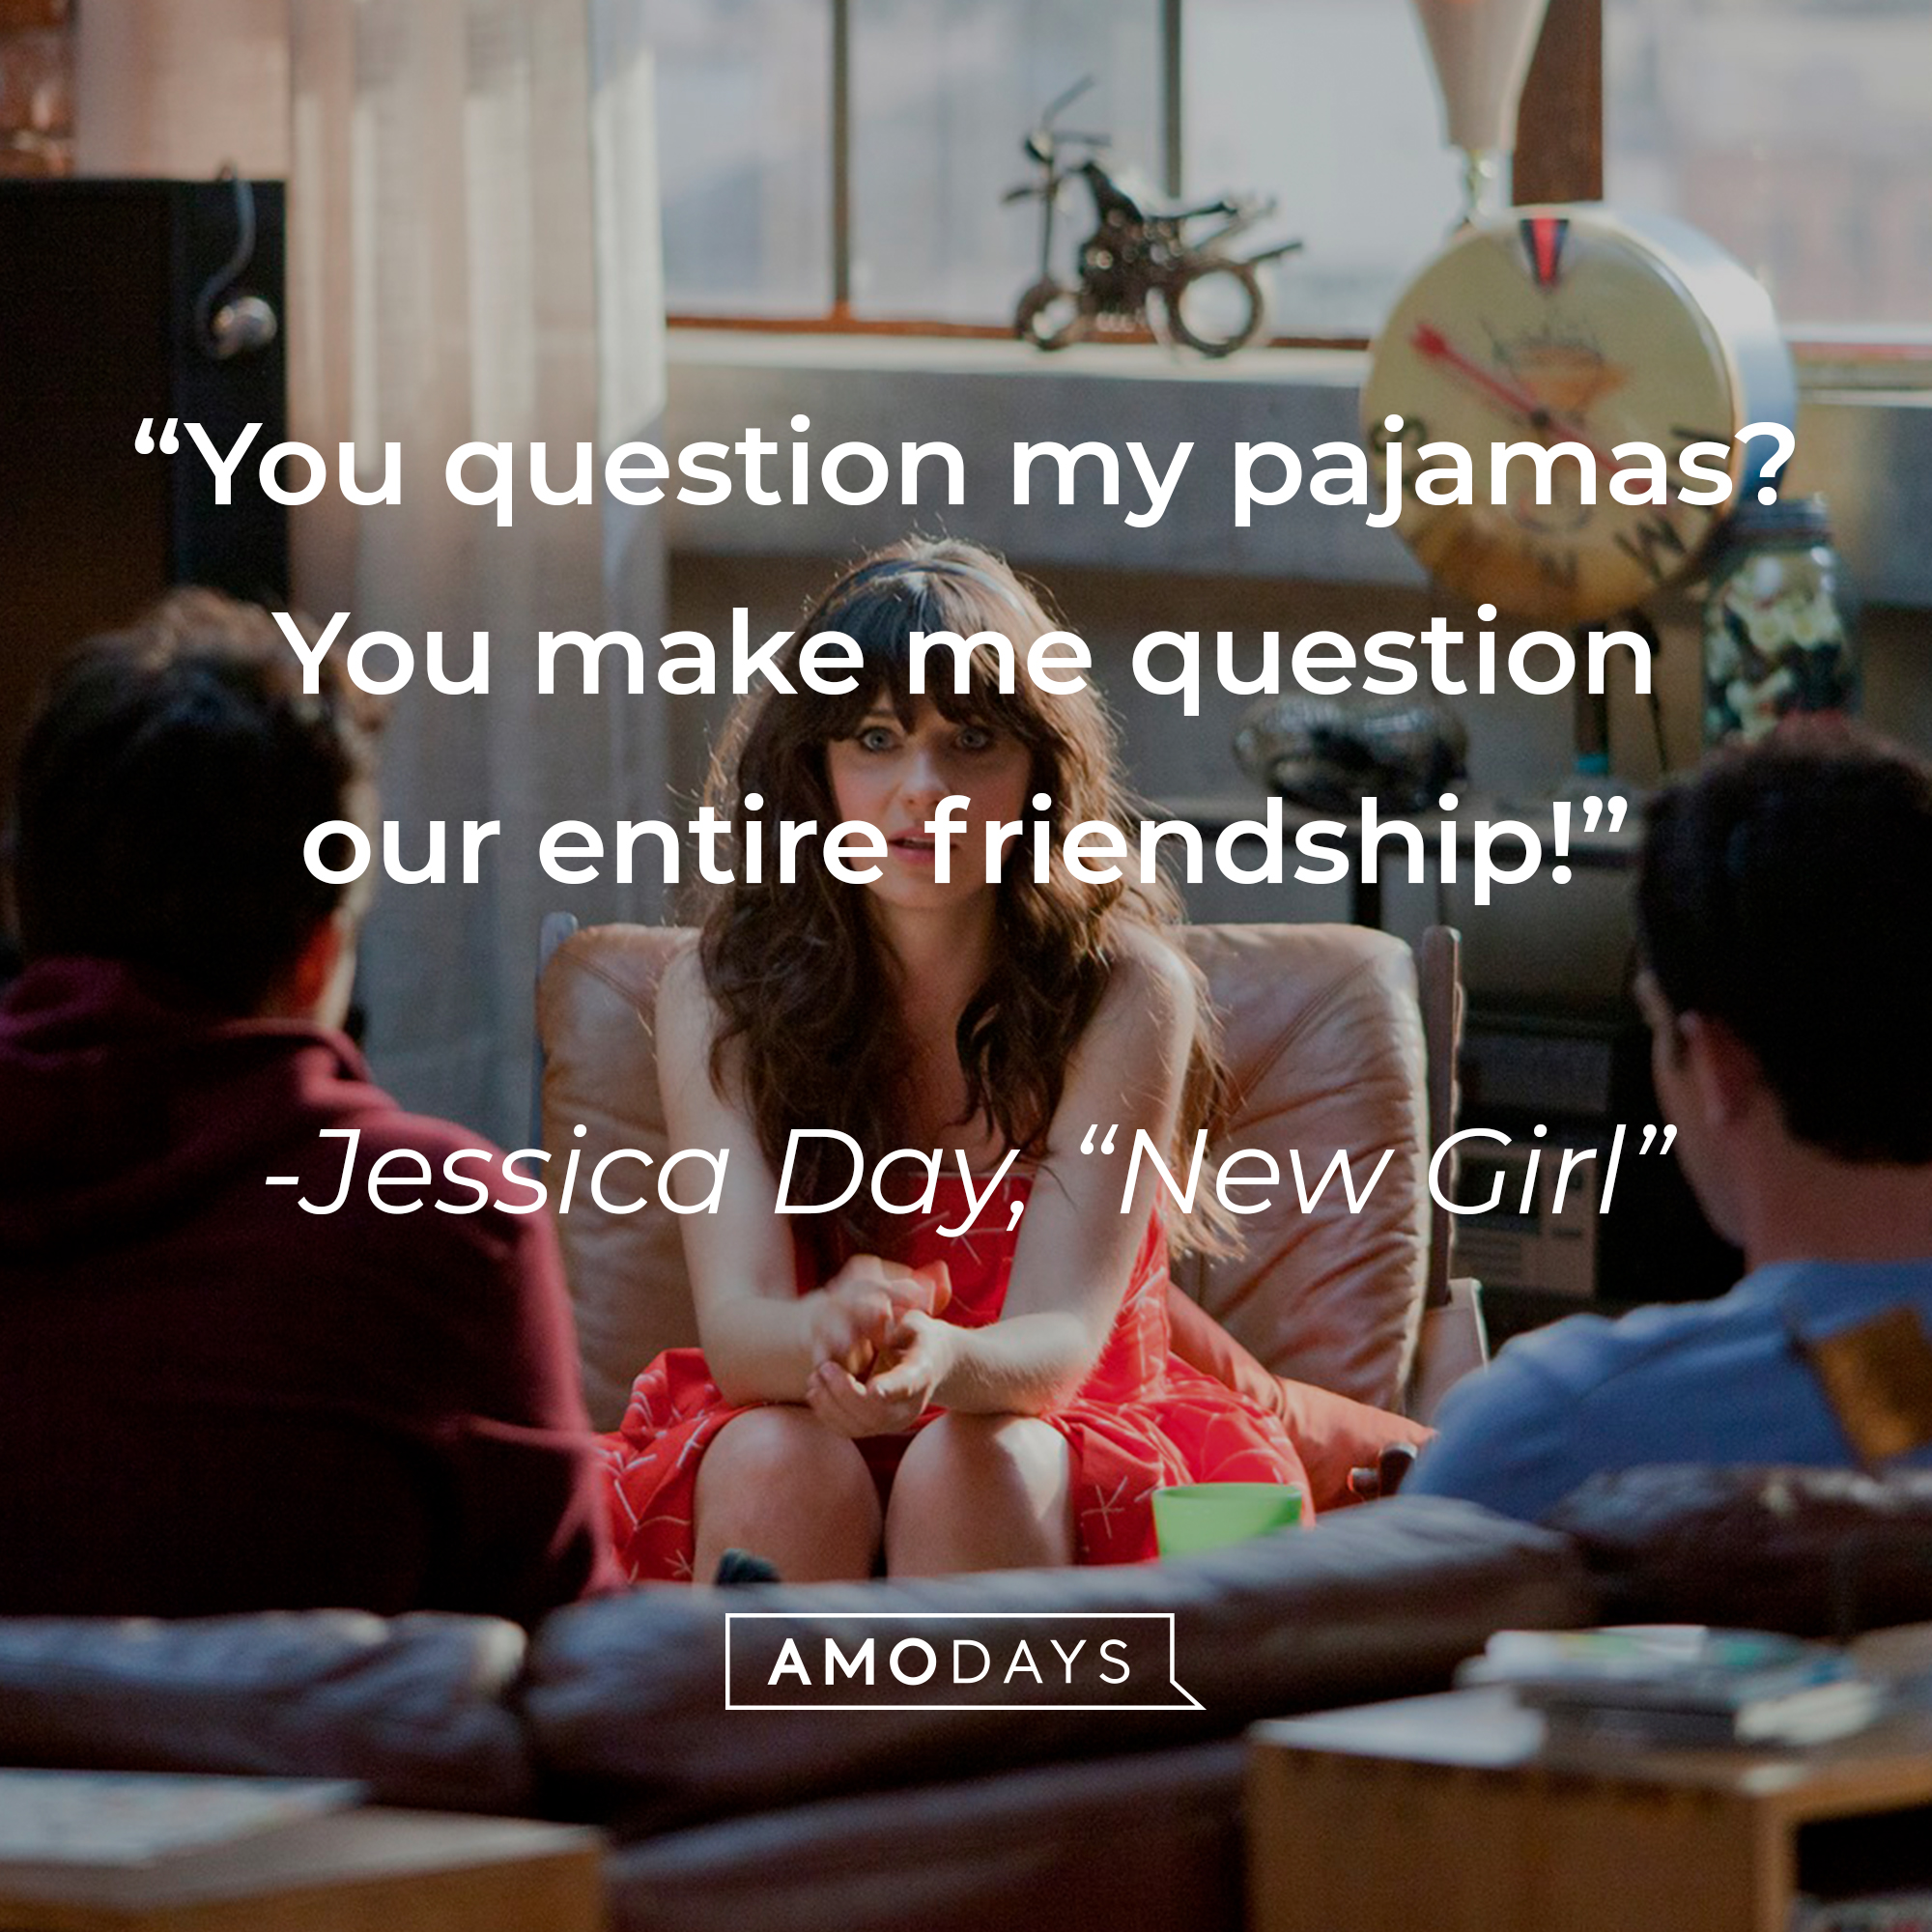 Jessica Day’s quote from “New Girl”: “You question my pajamas? You make me question our entire friendship!” | Source: facebook.com/OfficialNewGirl